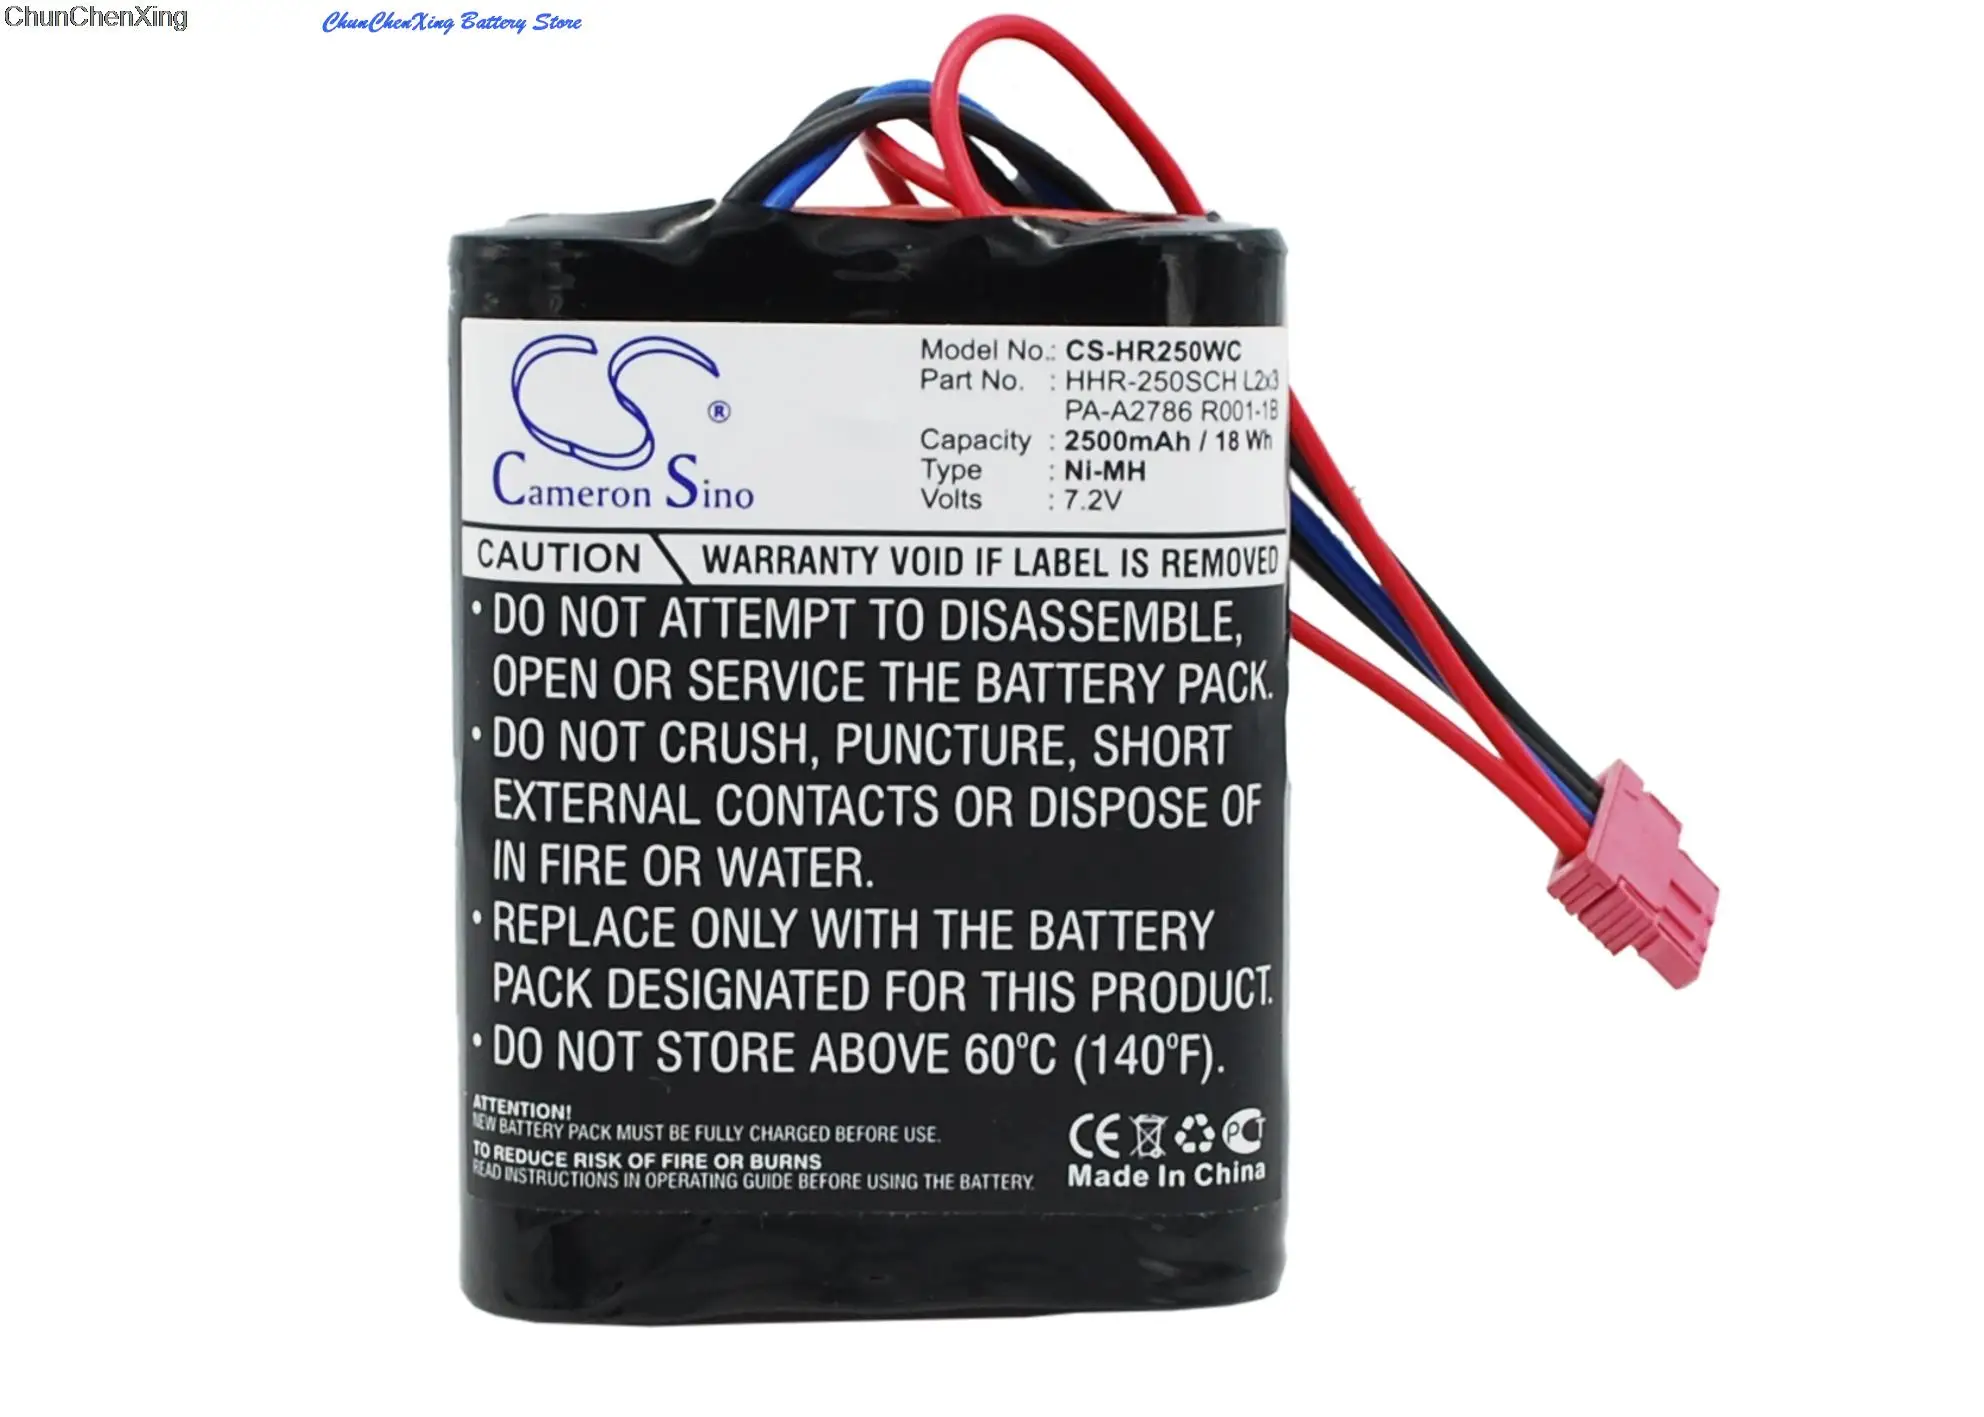 

Cameron Sino 2500mAh Battery for Panasonic HHR-250SCH L2x3, PA-A2786 R001-1B ( With the connector )